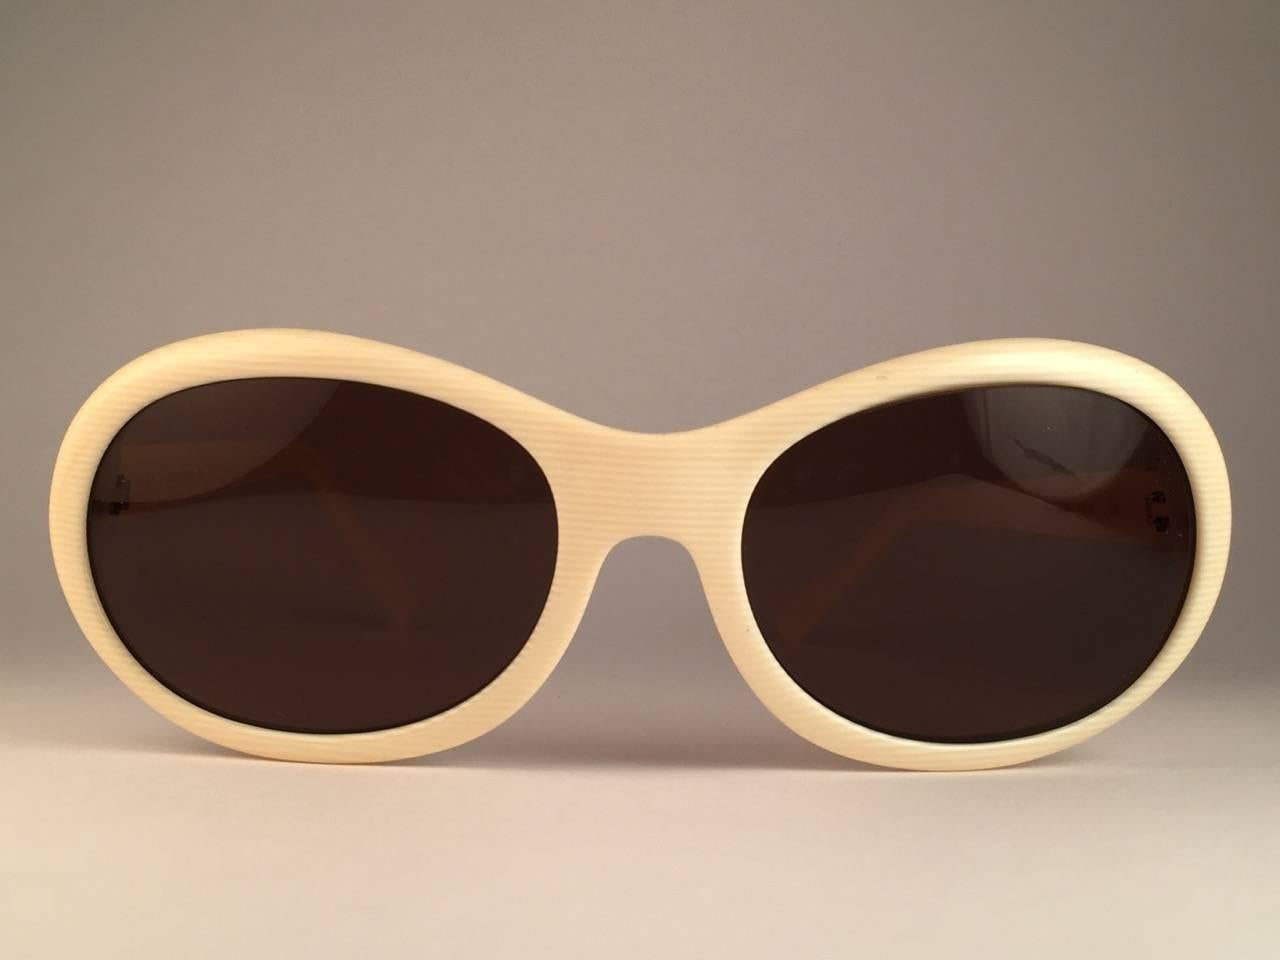 New Cartier Trinity Sunglasses with brown (uv protection) lenses. 
Frame is ivory and has the famous real gold and white gold accents. All hallmarks. Both arms sport the famous gold Trinity sign from Cartier on the temple. These are like a pair of